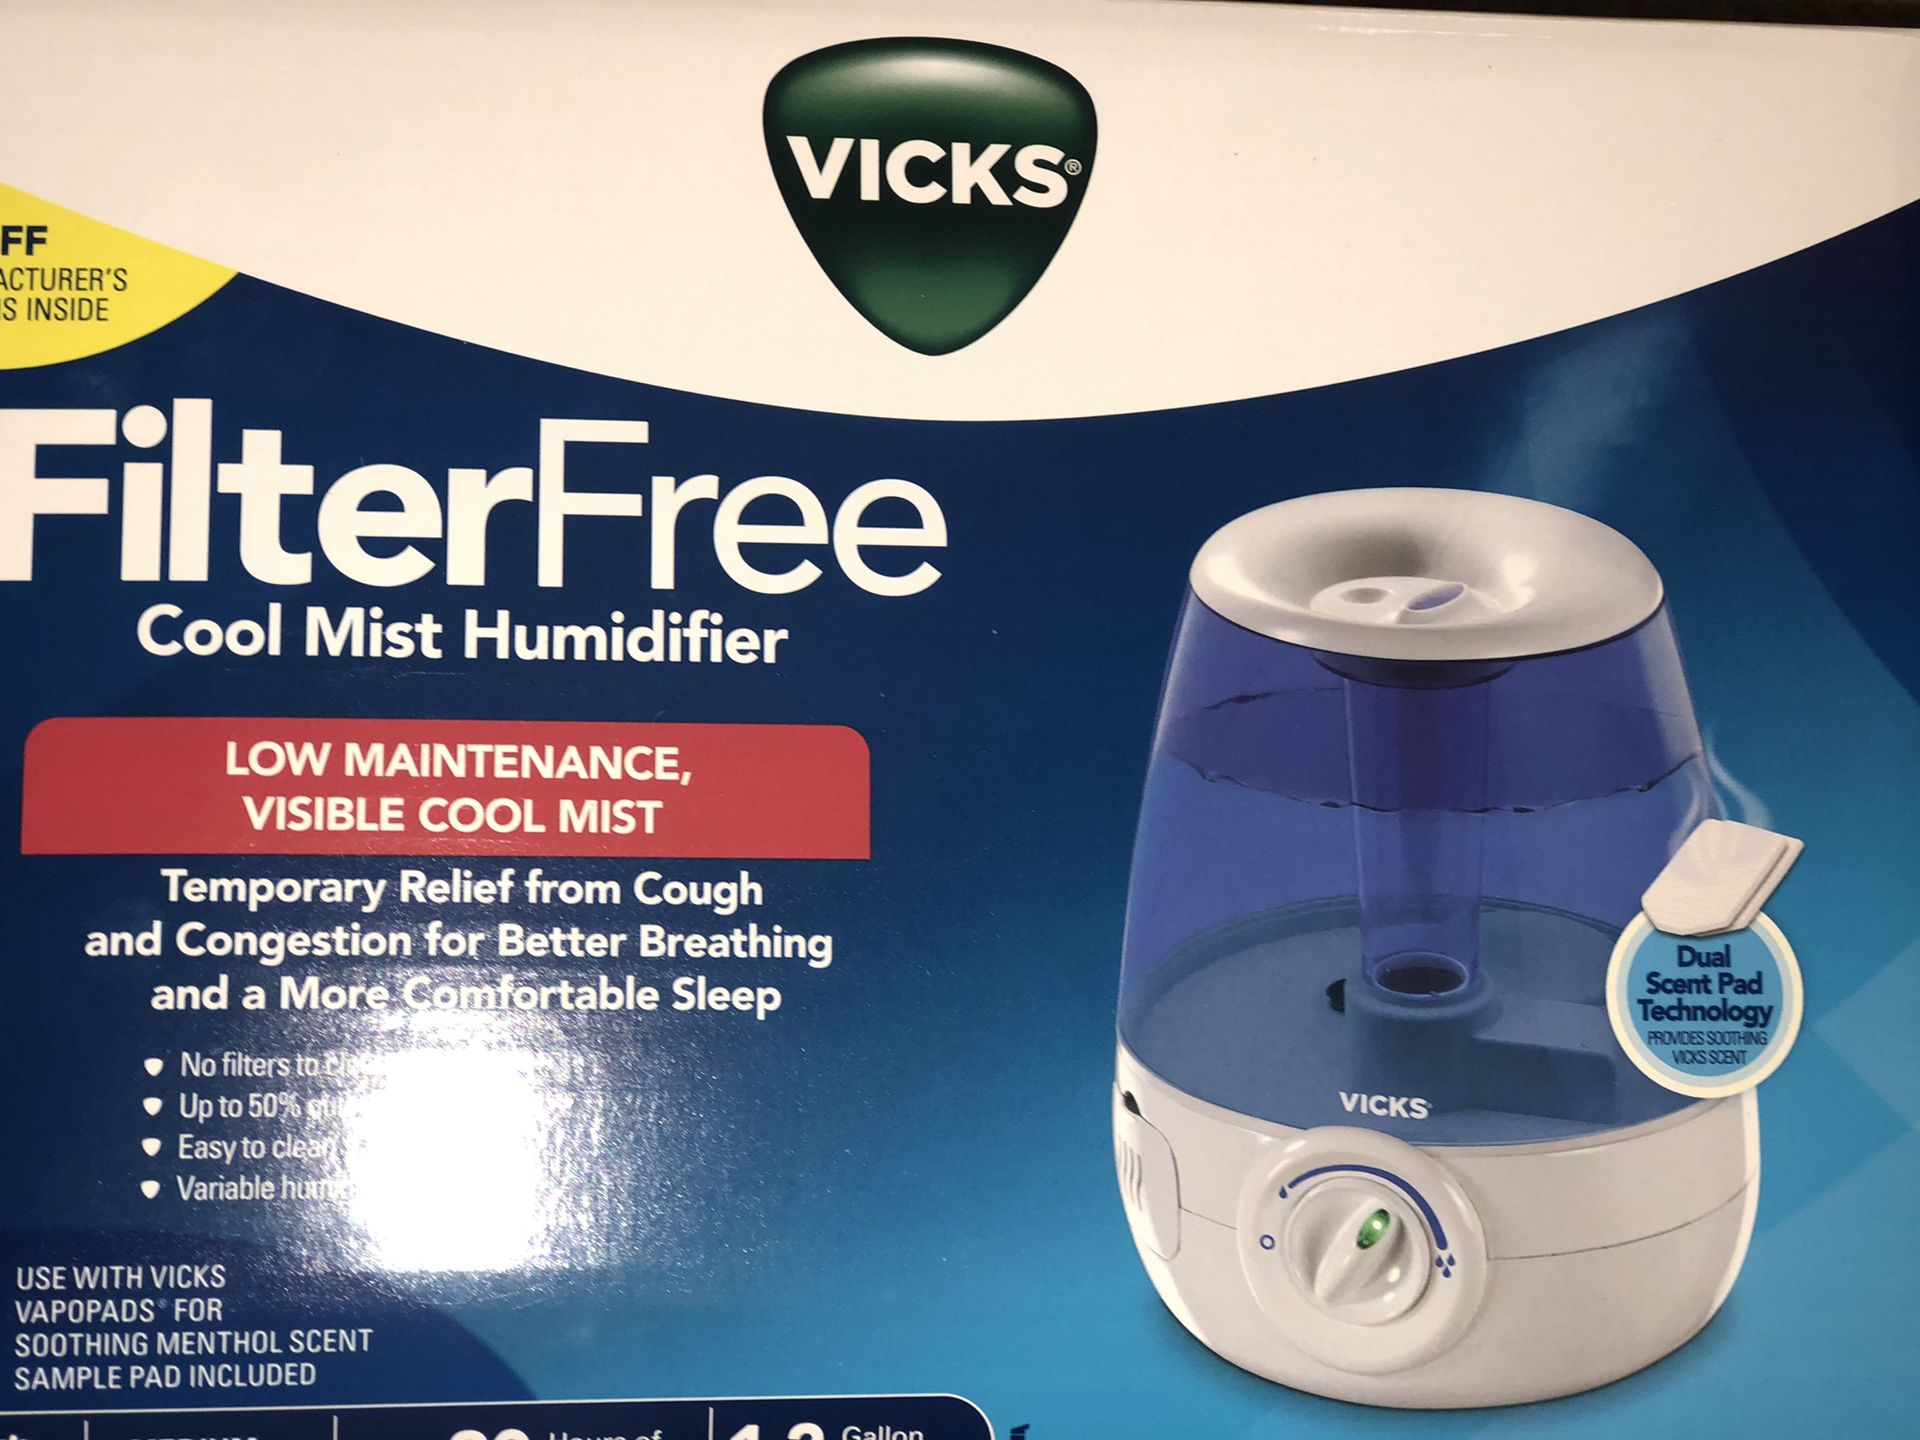 Filter free cool mist humidifier